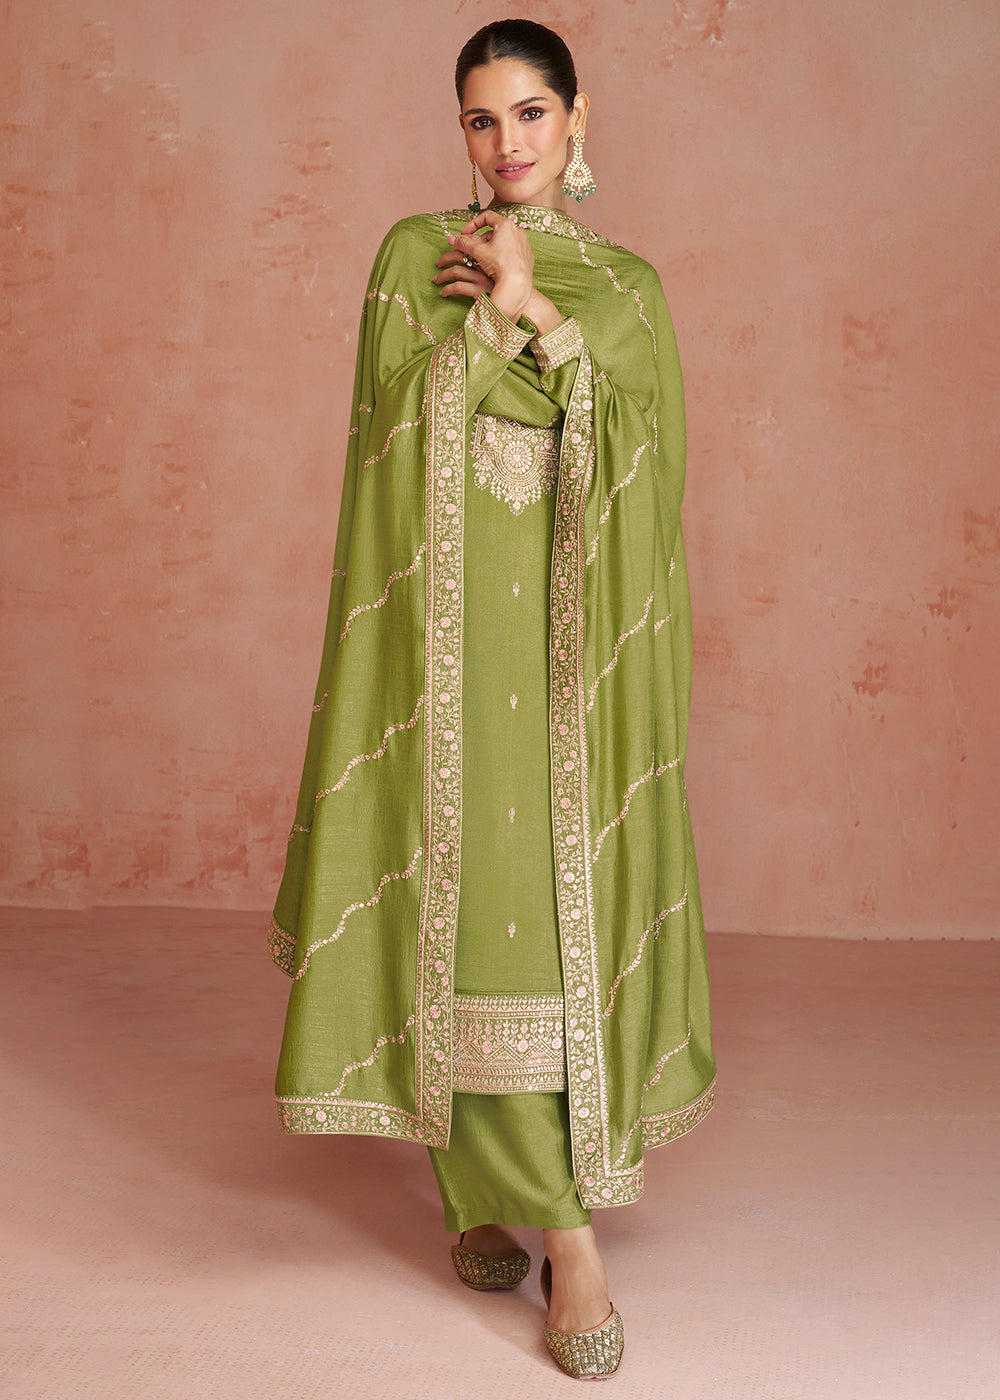 Buy Now Elegant Lime Green Silk Embroidered Palazzo Salwar Kameez Online in USA, UK, Canada, Germany, Australia & Worldwide at Empress Clothing. 